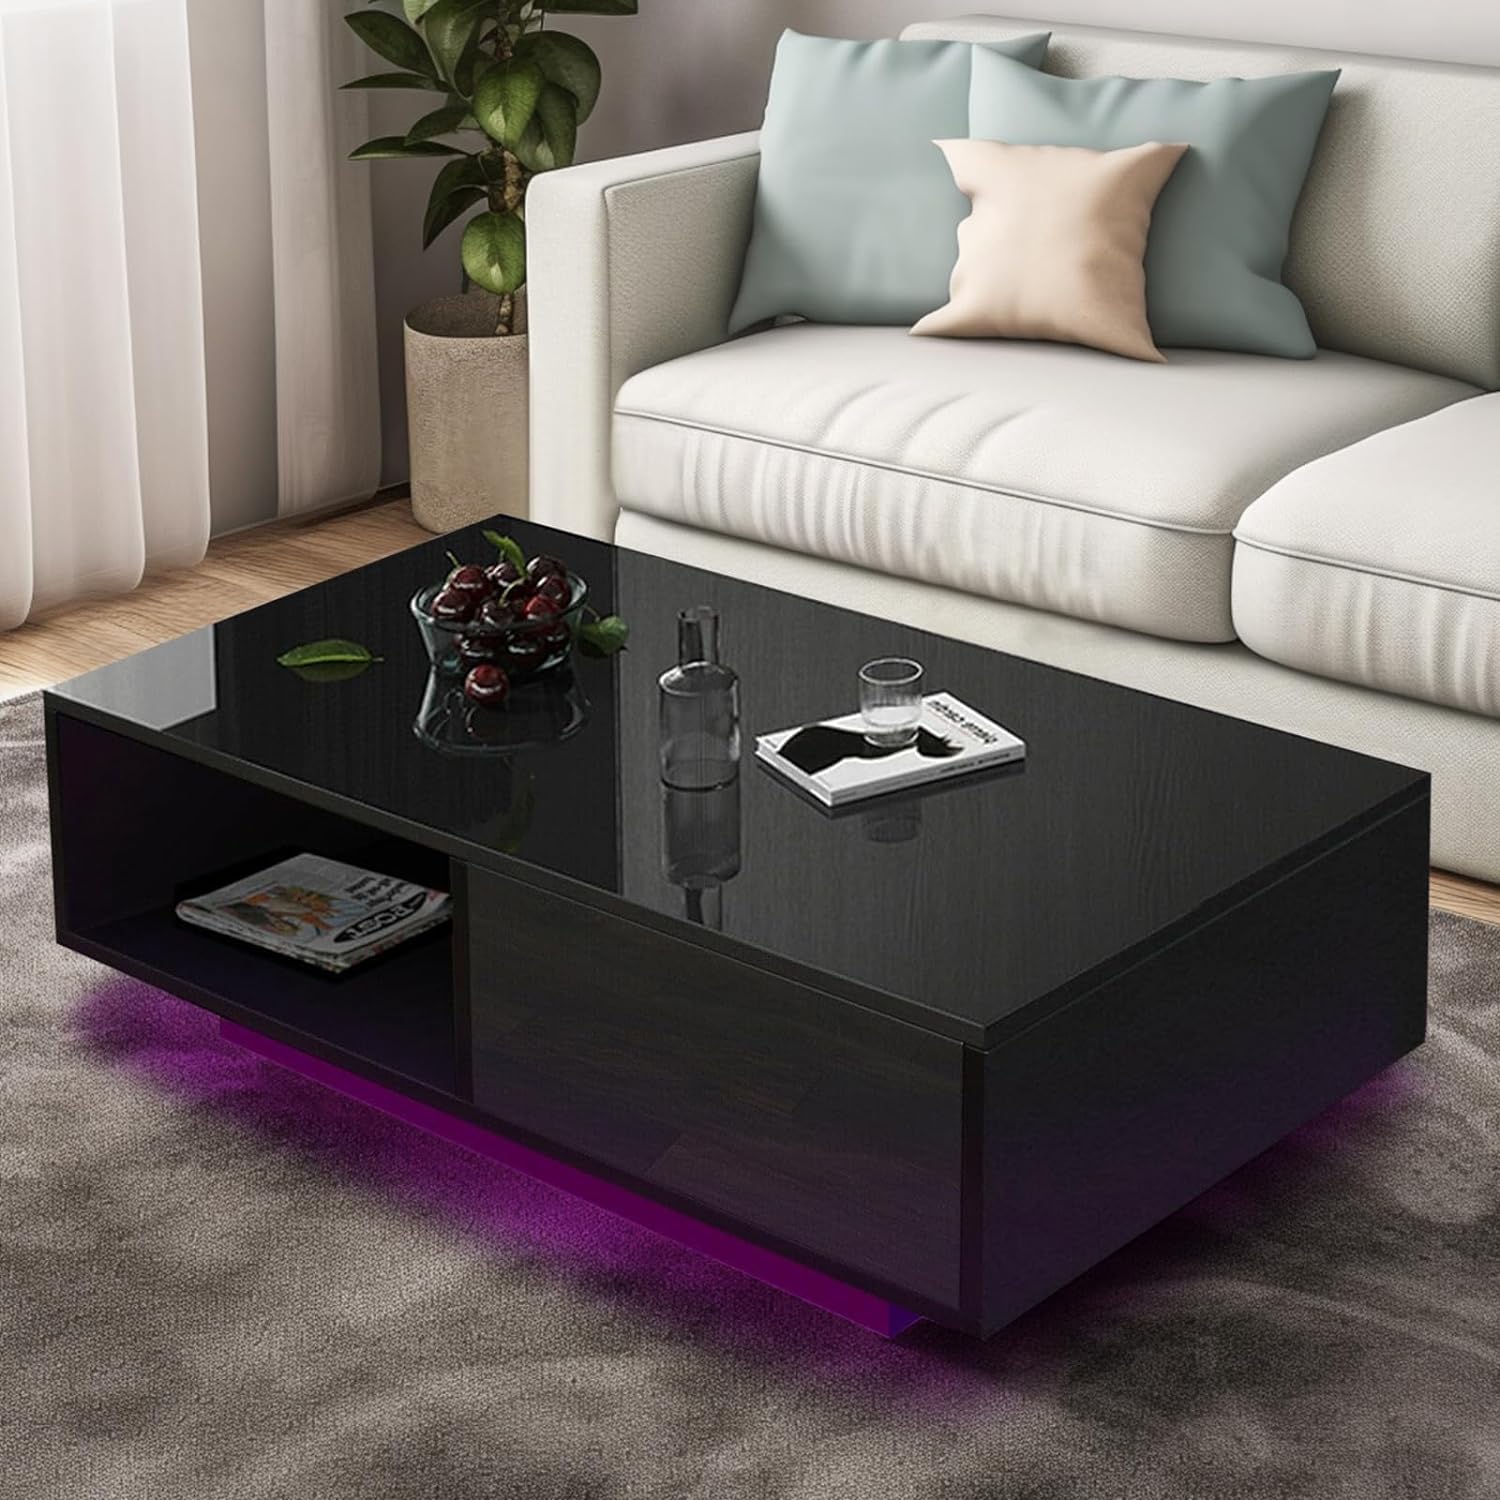 COSVALVE 43.3IN LED Black Coffee Tables for Living Room with 16 Colors LED Lights Modern Coffee Table with Storage Drawer Rectangle Center Table for Home Furniture